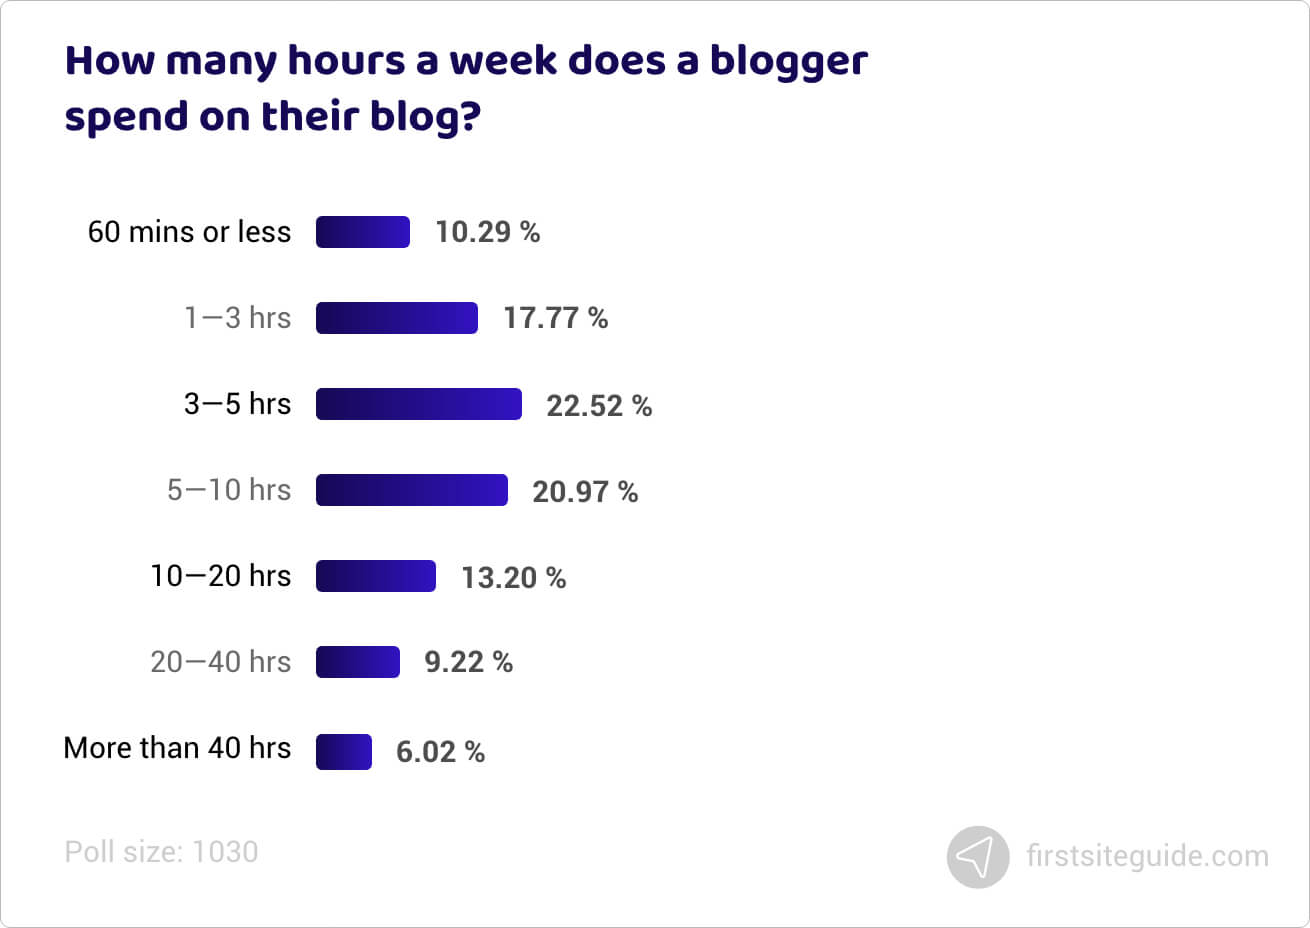 How many hours a week does a blogger spend on their blog